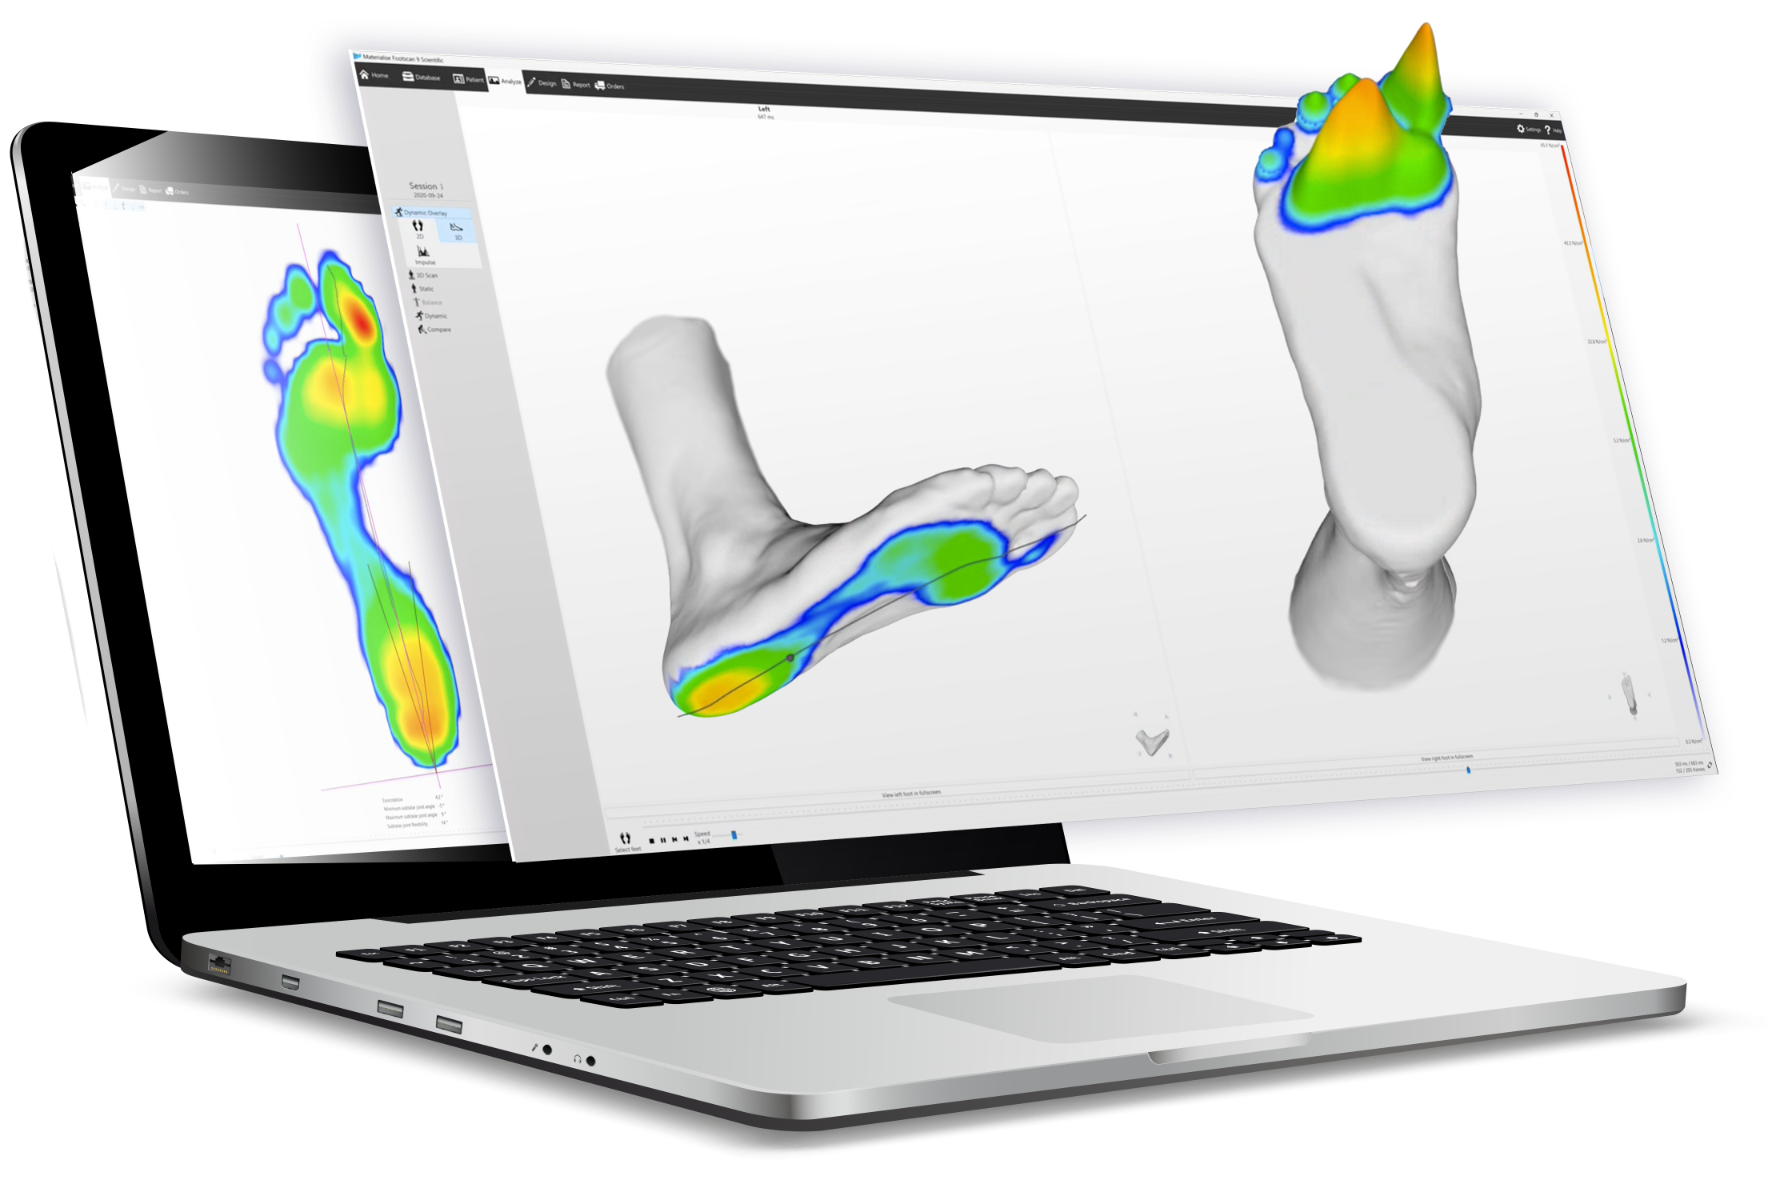 Computer-generated image displaying a heat map scan of two feet, highlighting various pressure areas. This image represents the software used in conjunction with the gait scanner and pressure plate.